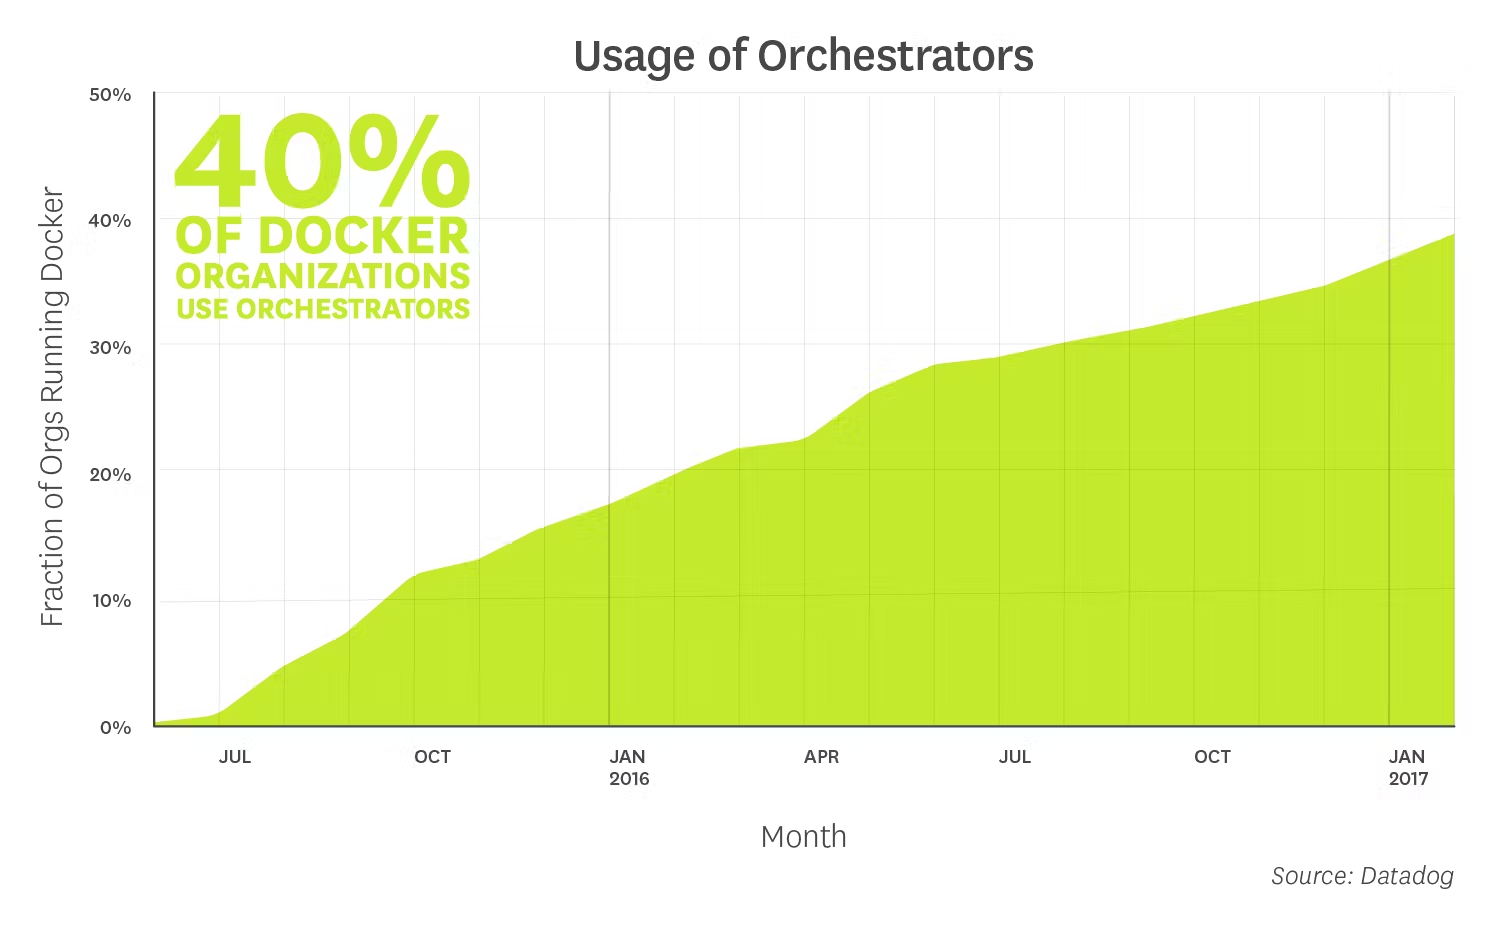 Usage of orchestrators